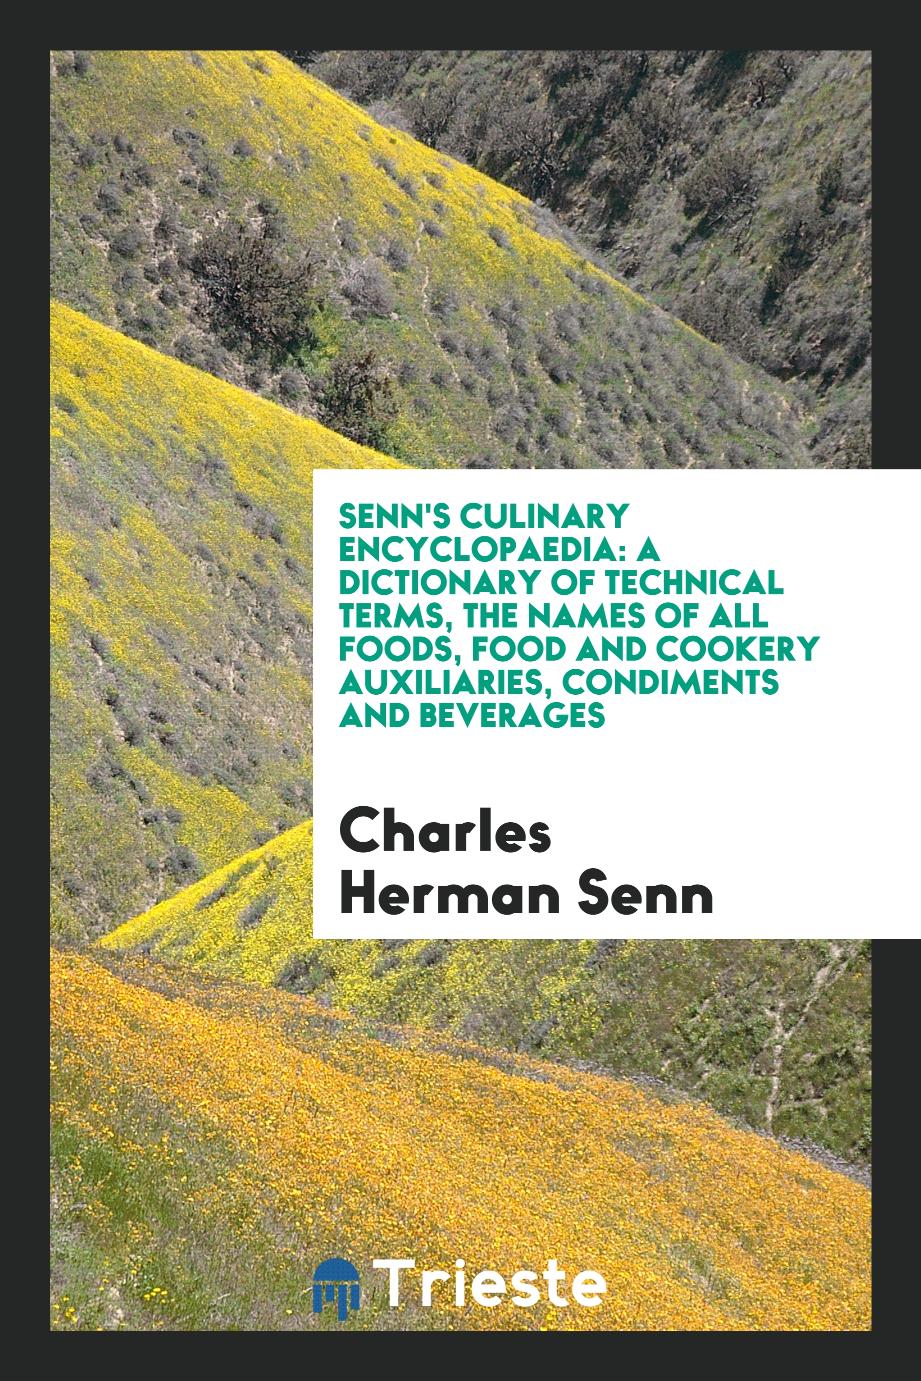 Senn's Culinary Encyclopaedia: A Dictionary of Technical Terms, the Names of All Foods, Food and Cookery Auxiliaries, Condiments and Beverages